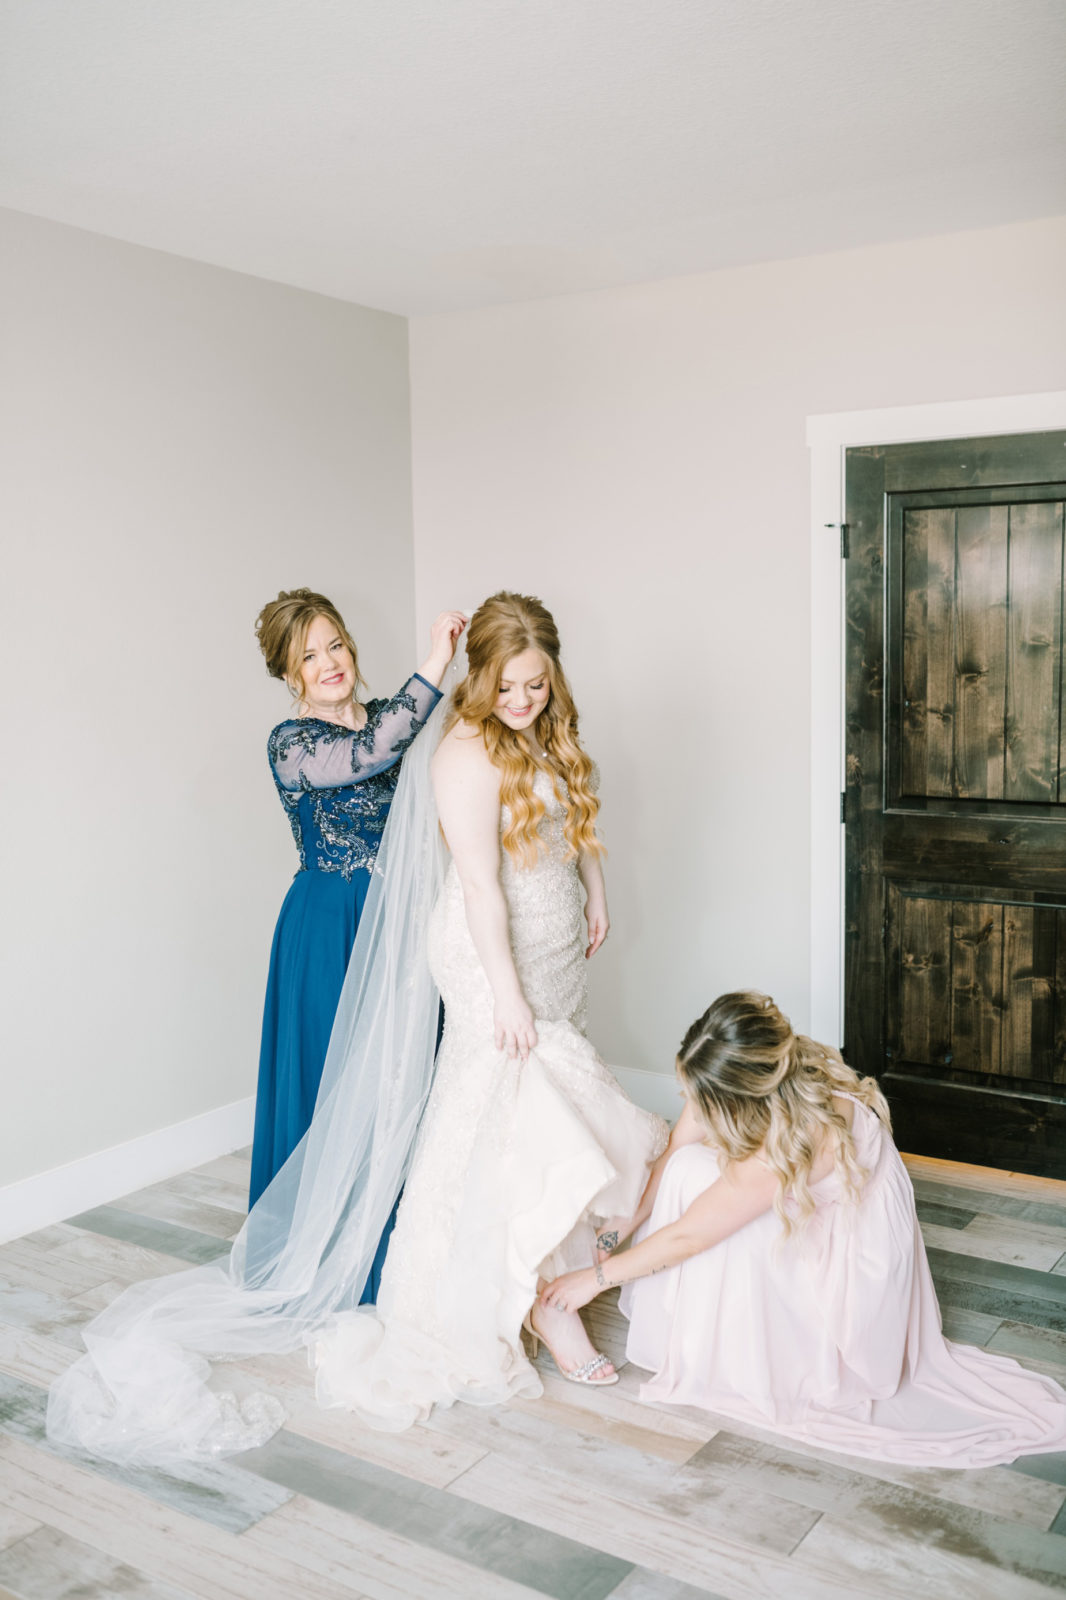 A maid-of-honor helps the bride put on her heels for her wedding by Christa Elliott Photography. bride getting ready #ChristinaElliottPhotography #ChristinaElliottWeddings #StillWatersRanchWedding #Texasweddings #countrywedding #ranchwedding